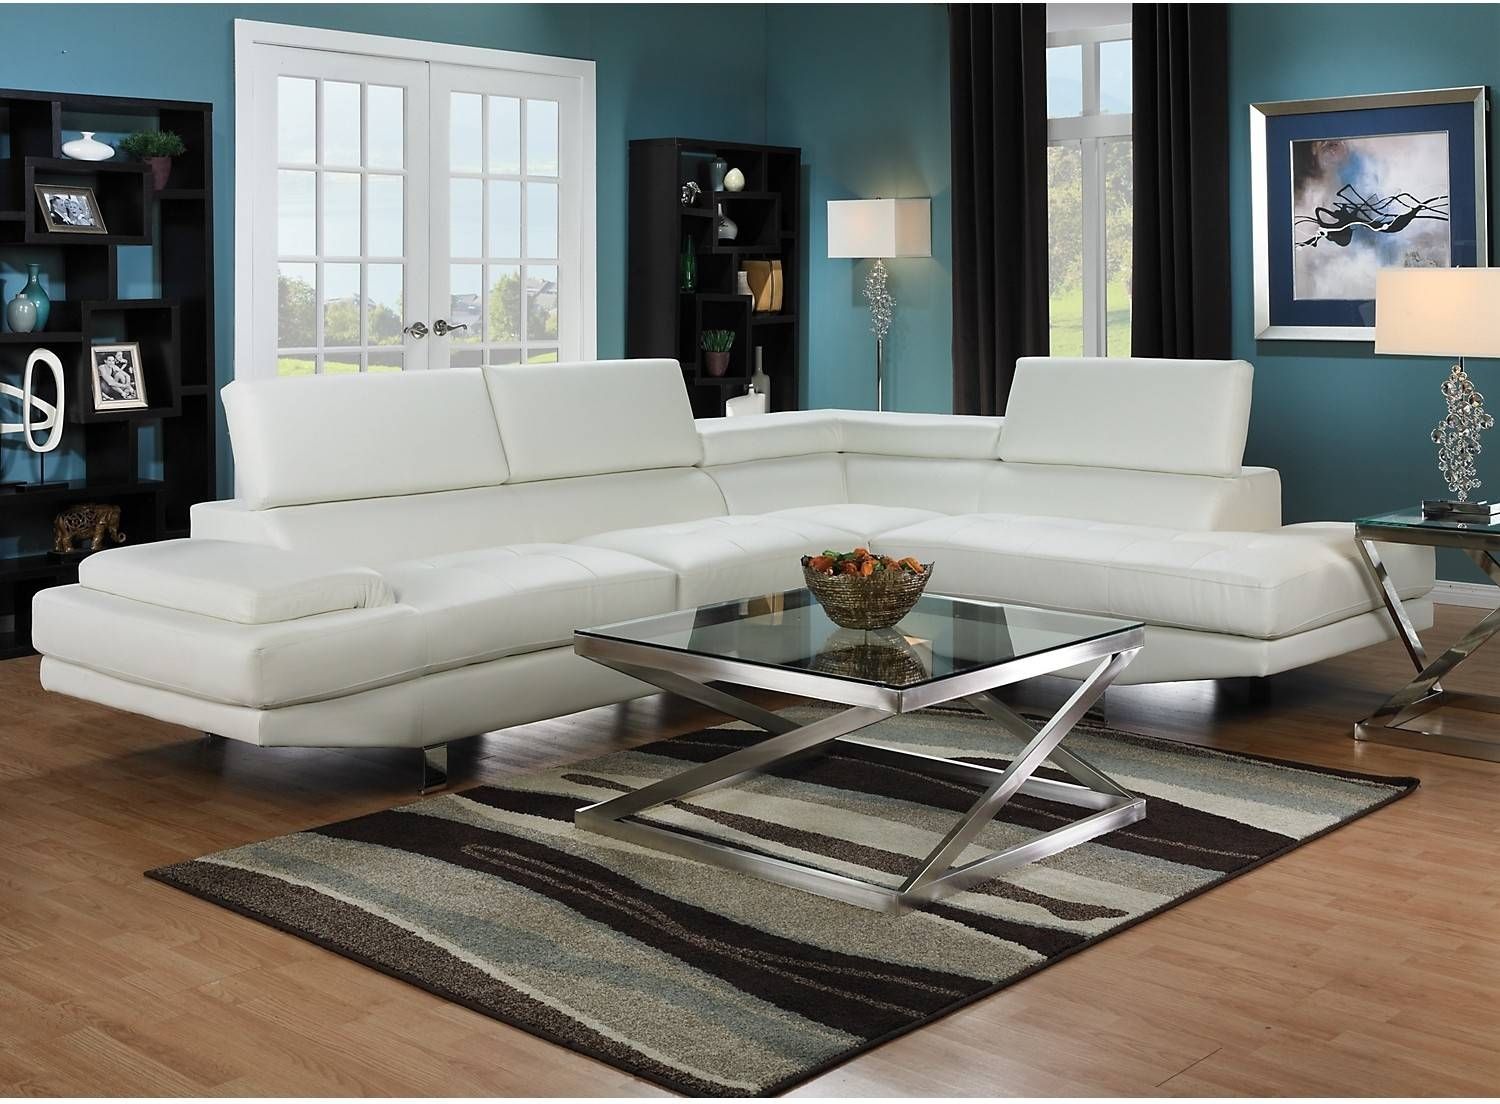 The Brick Sectional Sofas – Cleanupflorida With Brick Sofas (View 11 of 30)